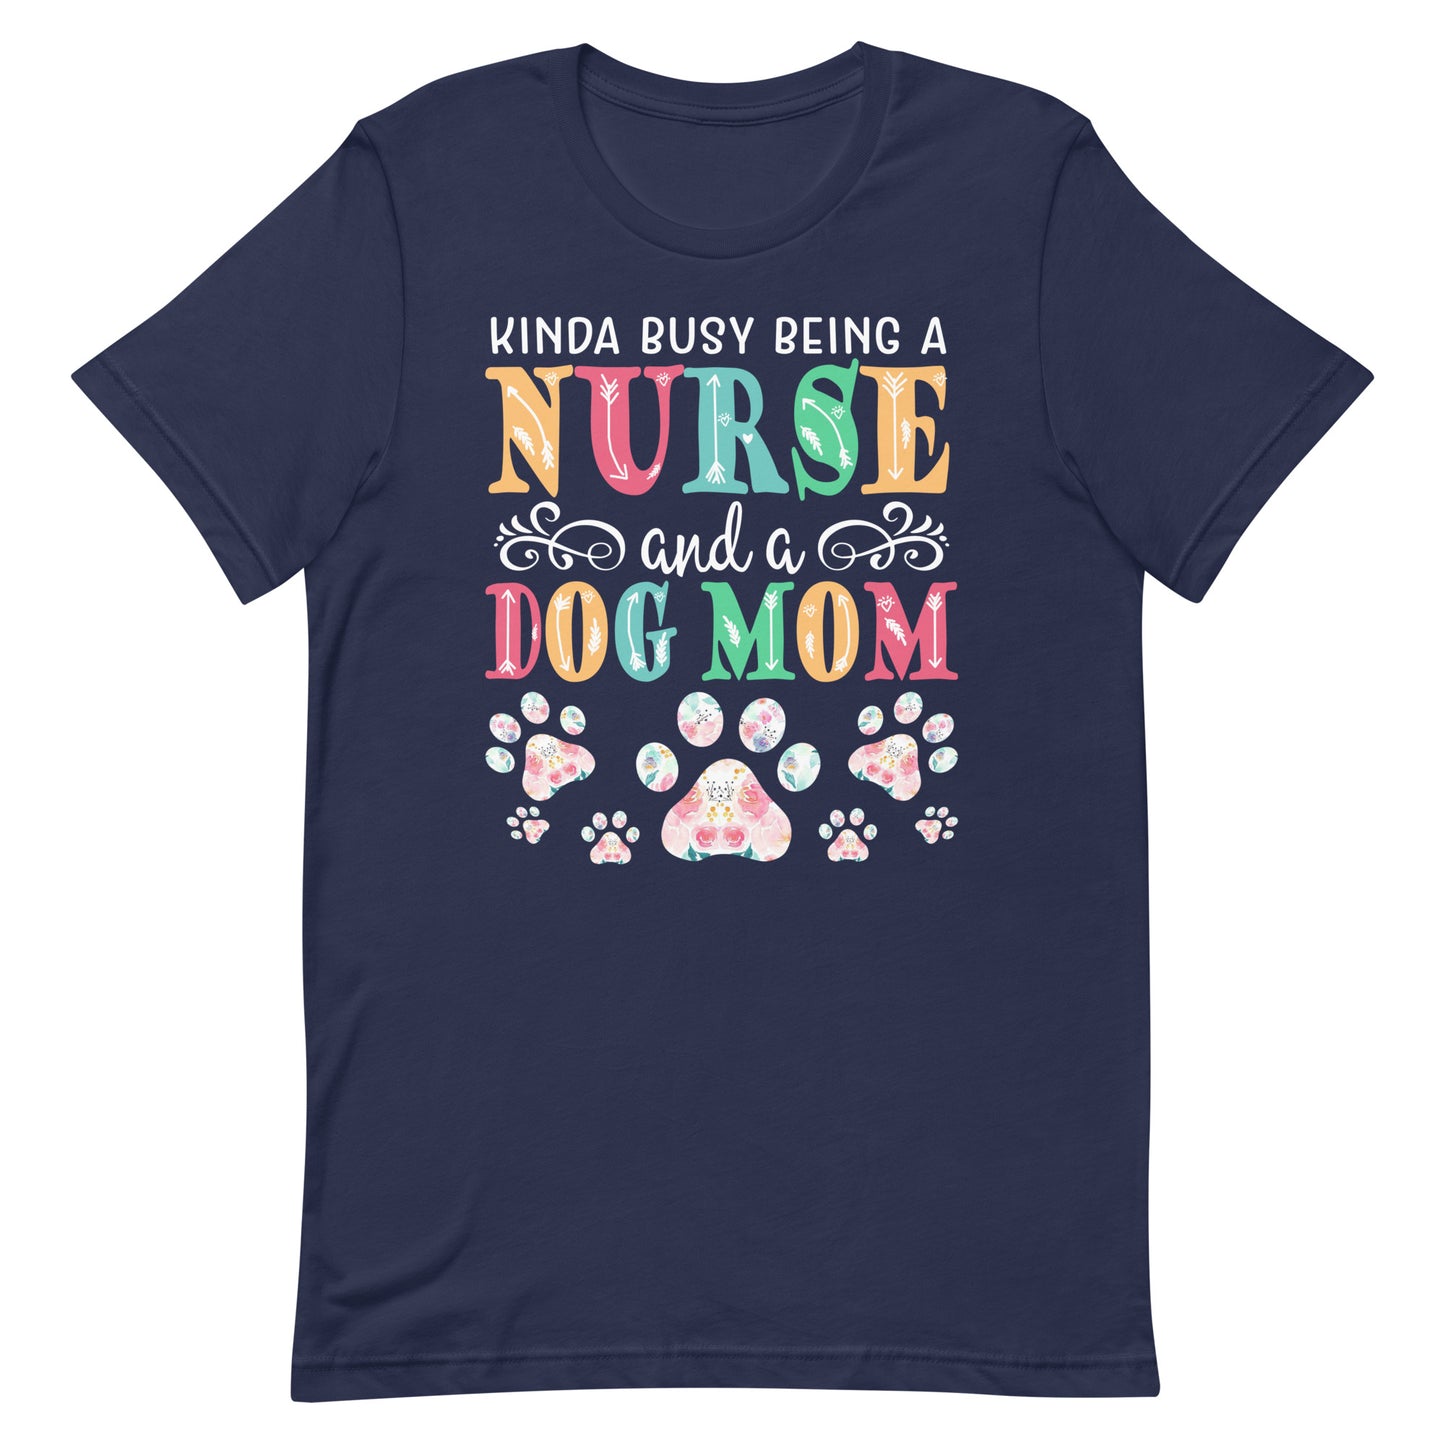 Busy Being a Nurse and a Dog Mom Tee